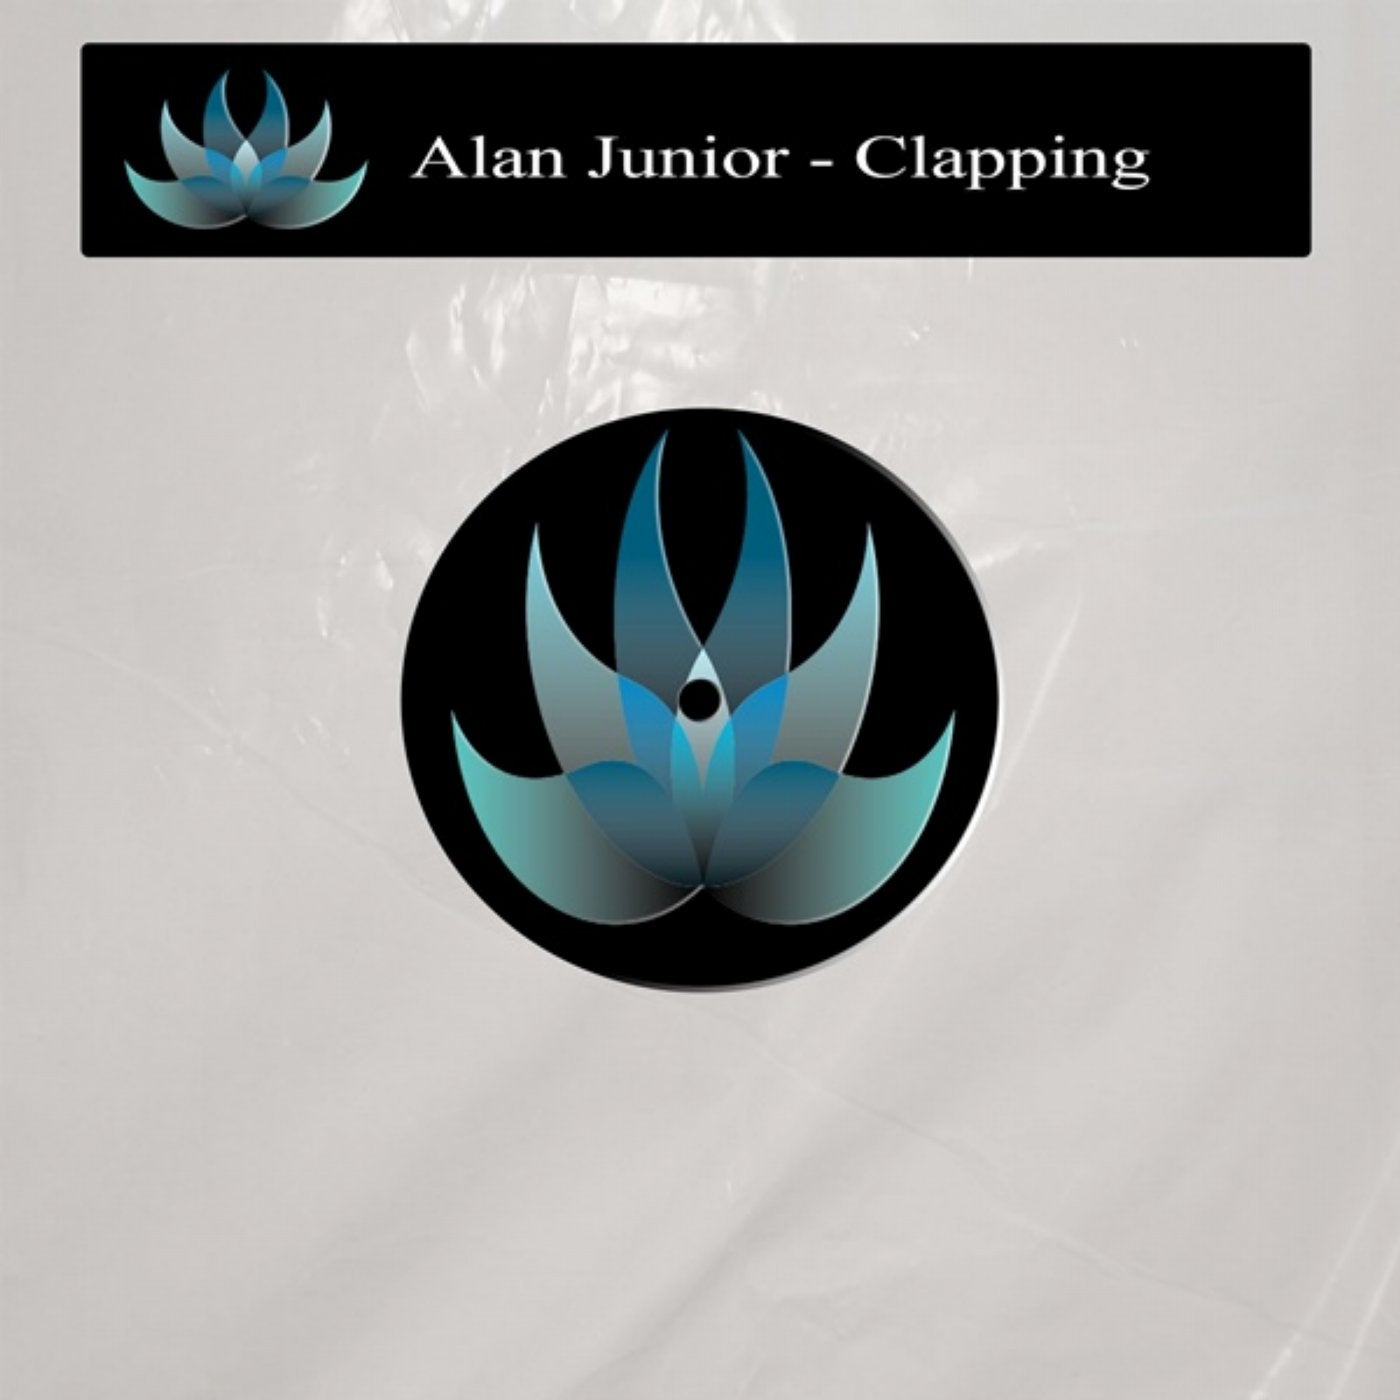 Clapping